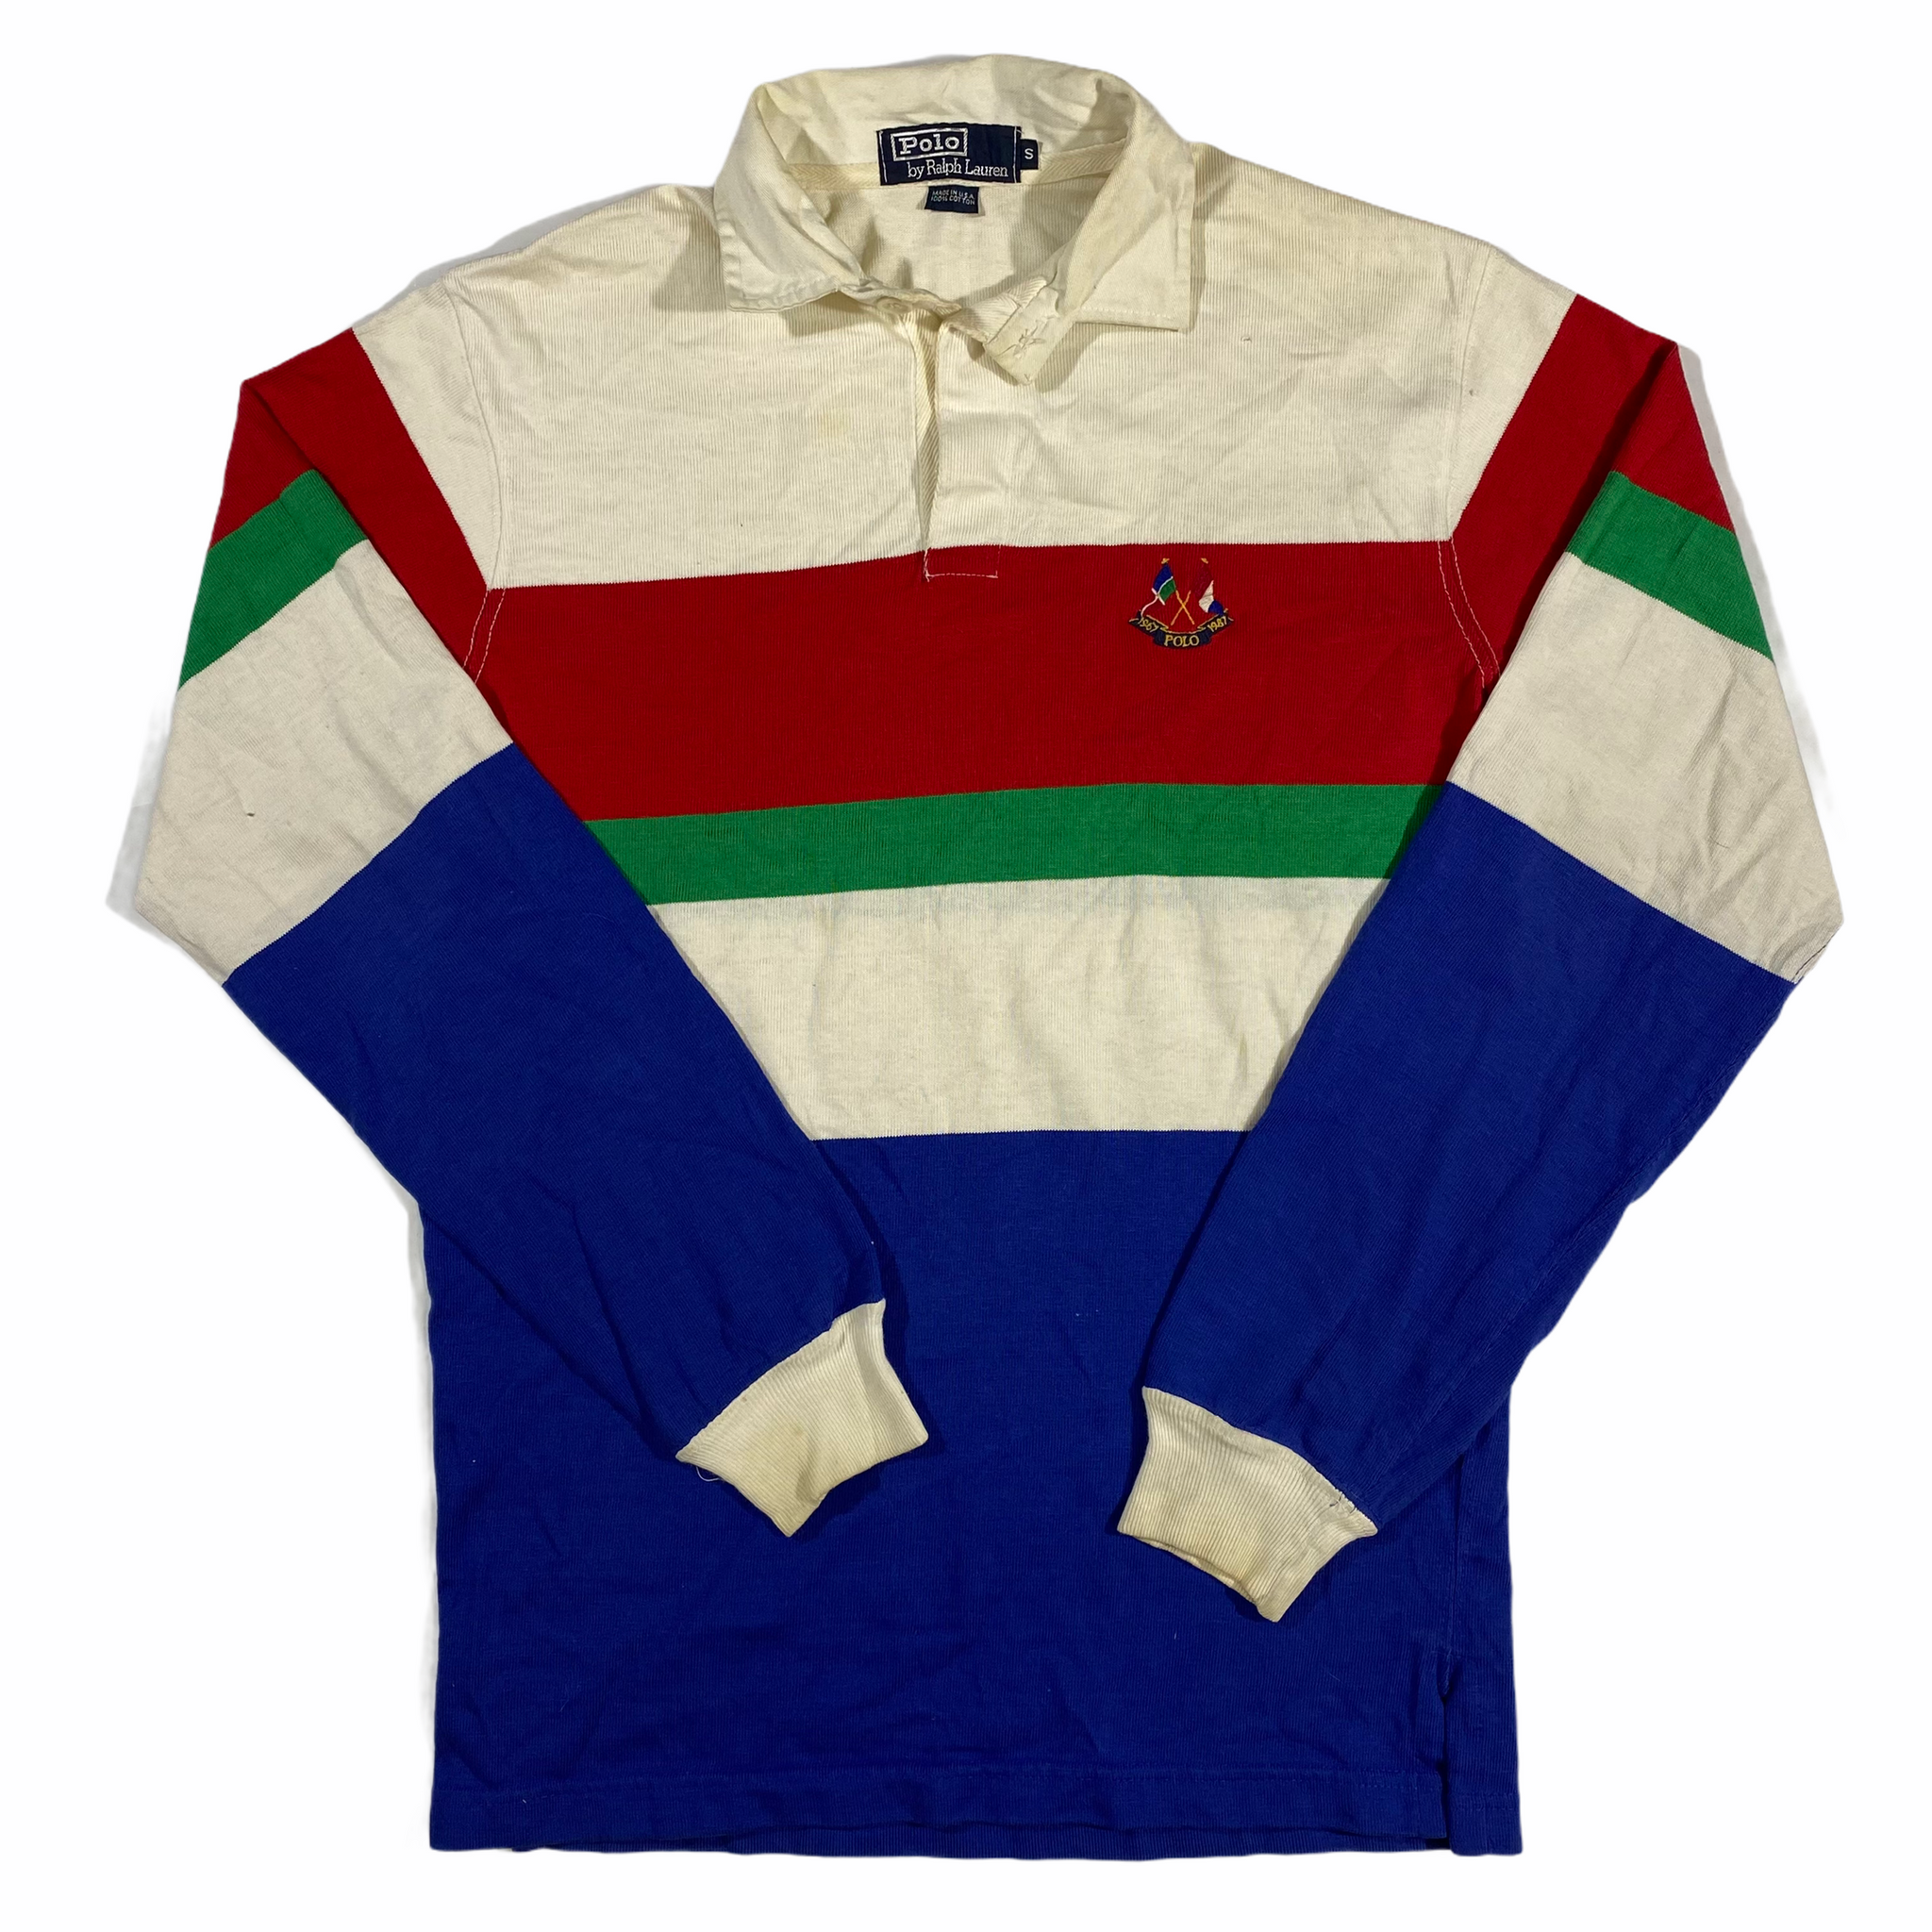 Polo ralph lauren 1987 cross flags rugby Small – Vintage Sponsor